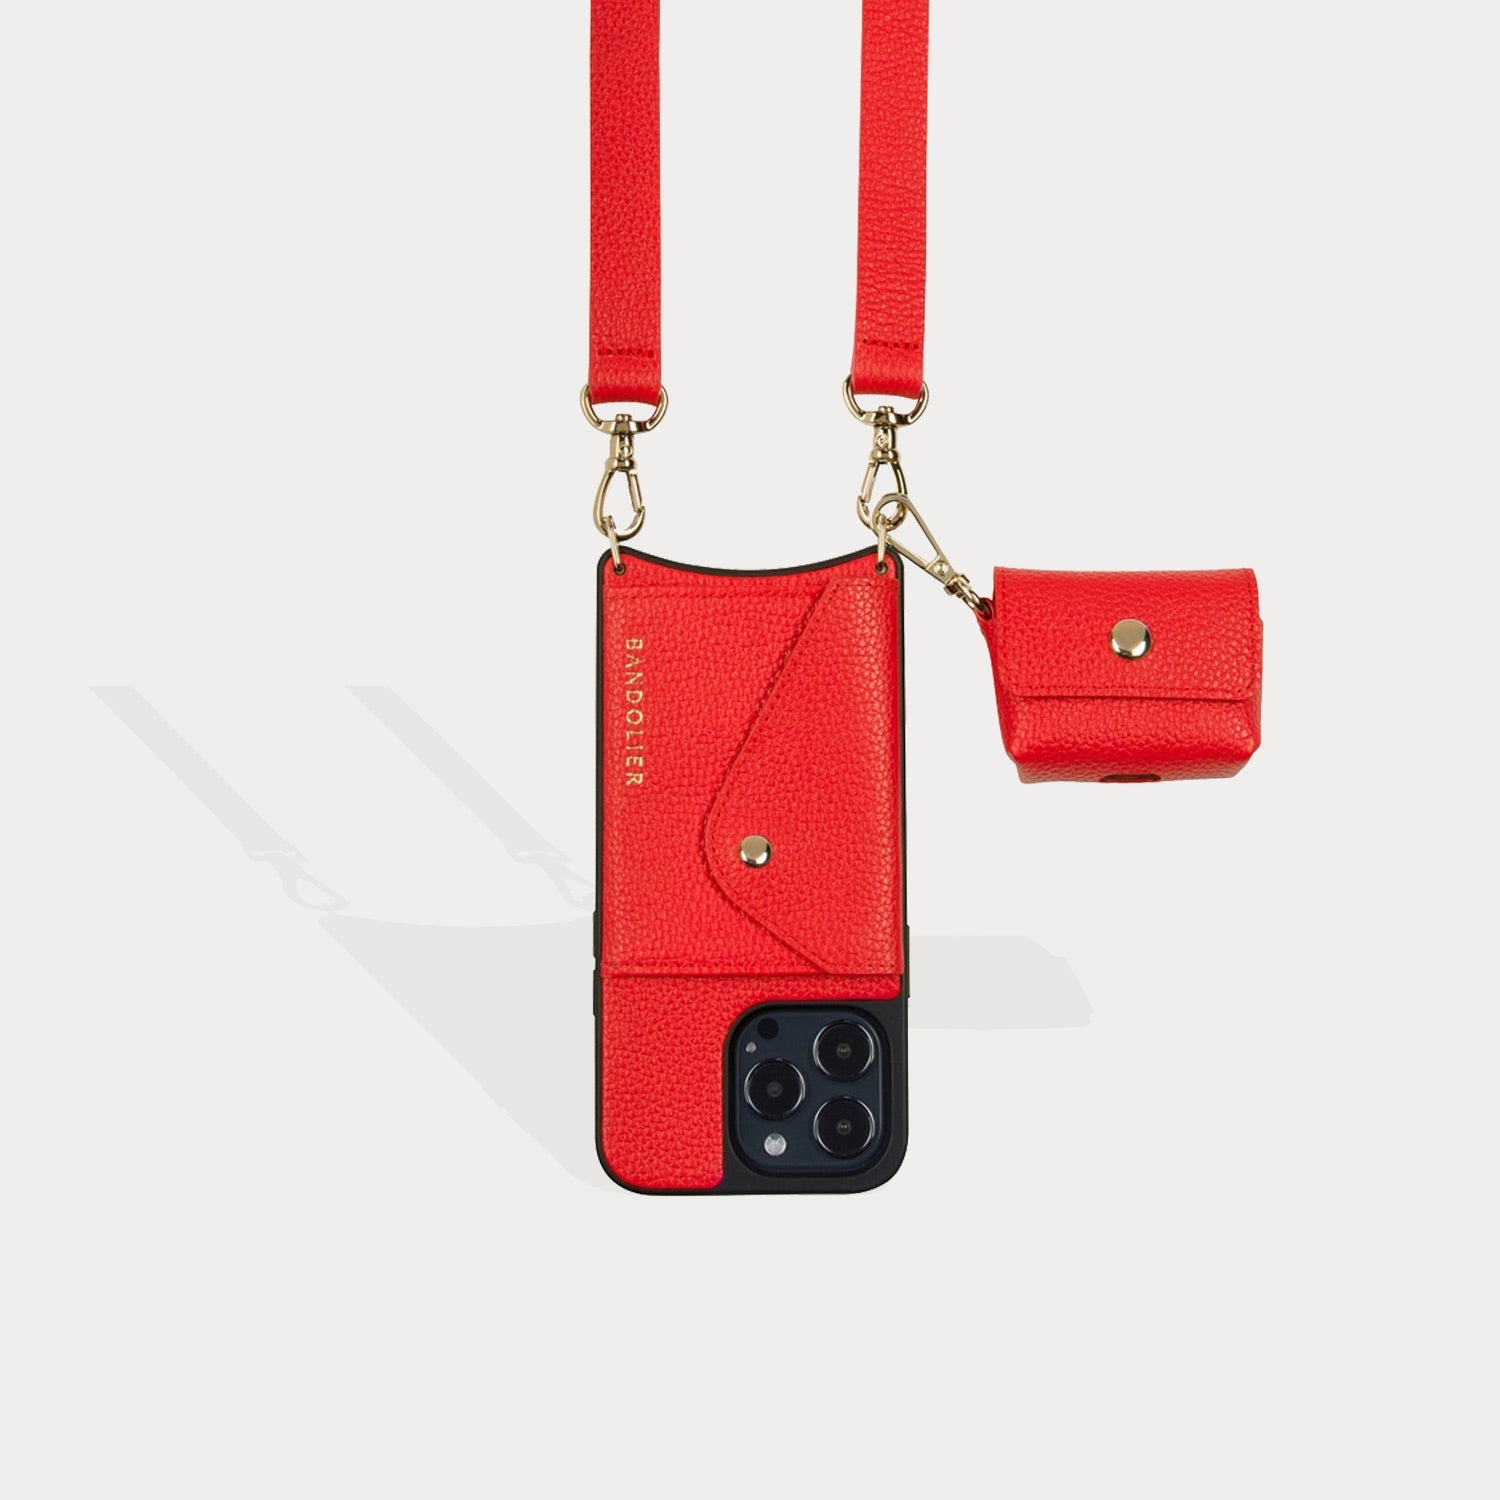 Avery AirPod Clip-On Pouch - Red/Gold Pouch Core Bandolier 